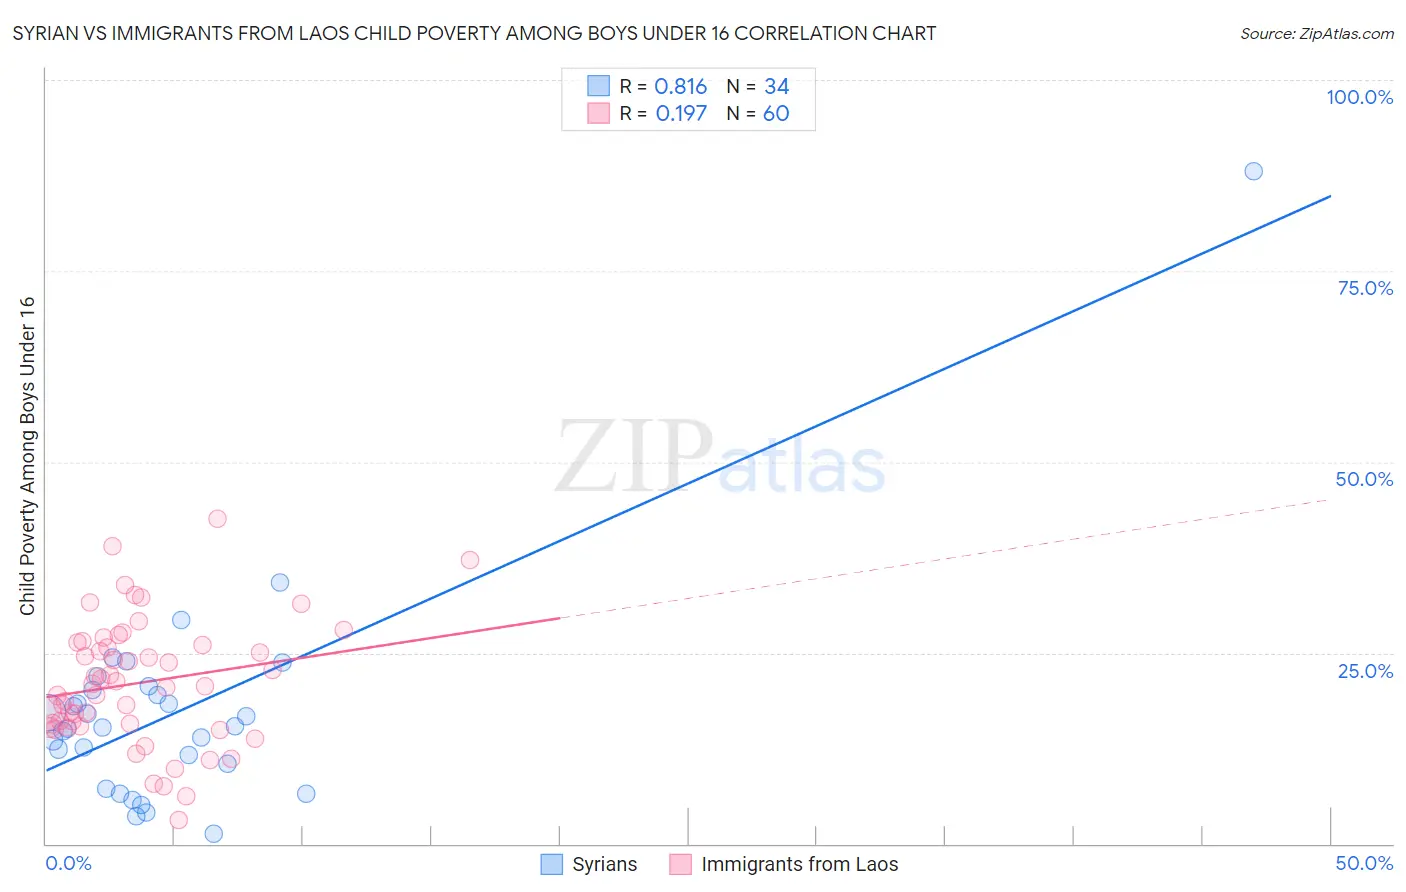 Syrian vs Immigrants from Laos Child Poverty Among Boys Under 16